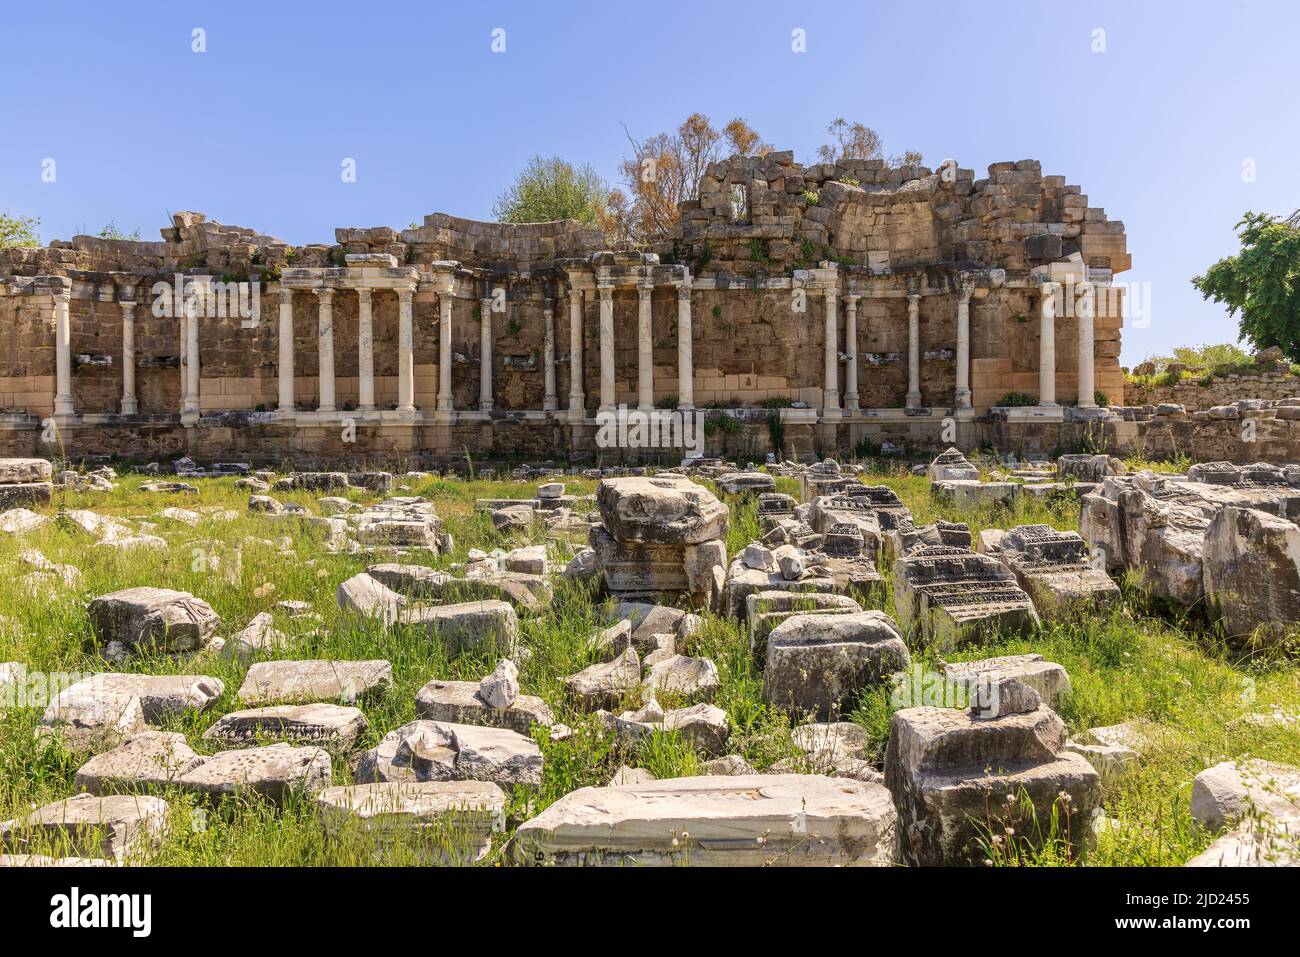 Ruins of the Monumental Fountain, Nymphaeum, in the ancient city of Side, Turkey. Stock Photo